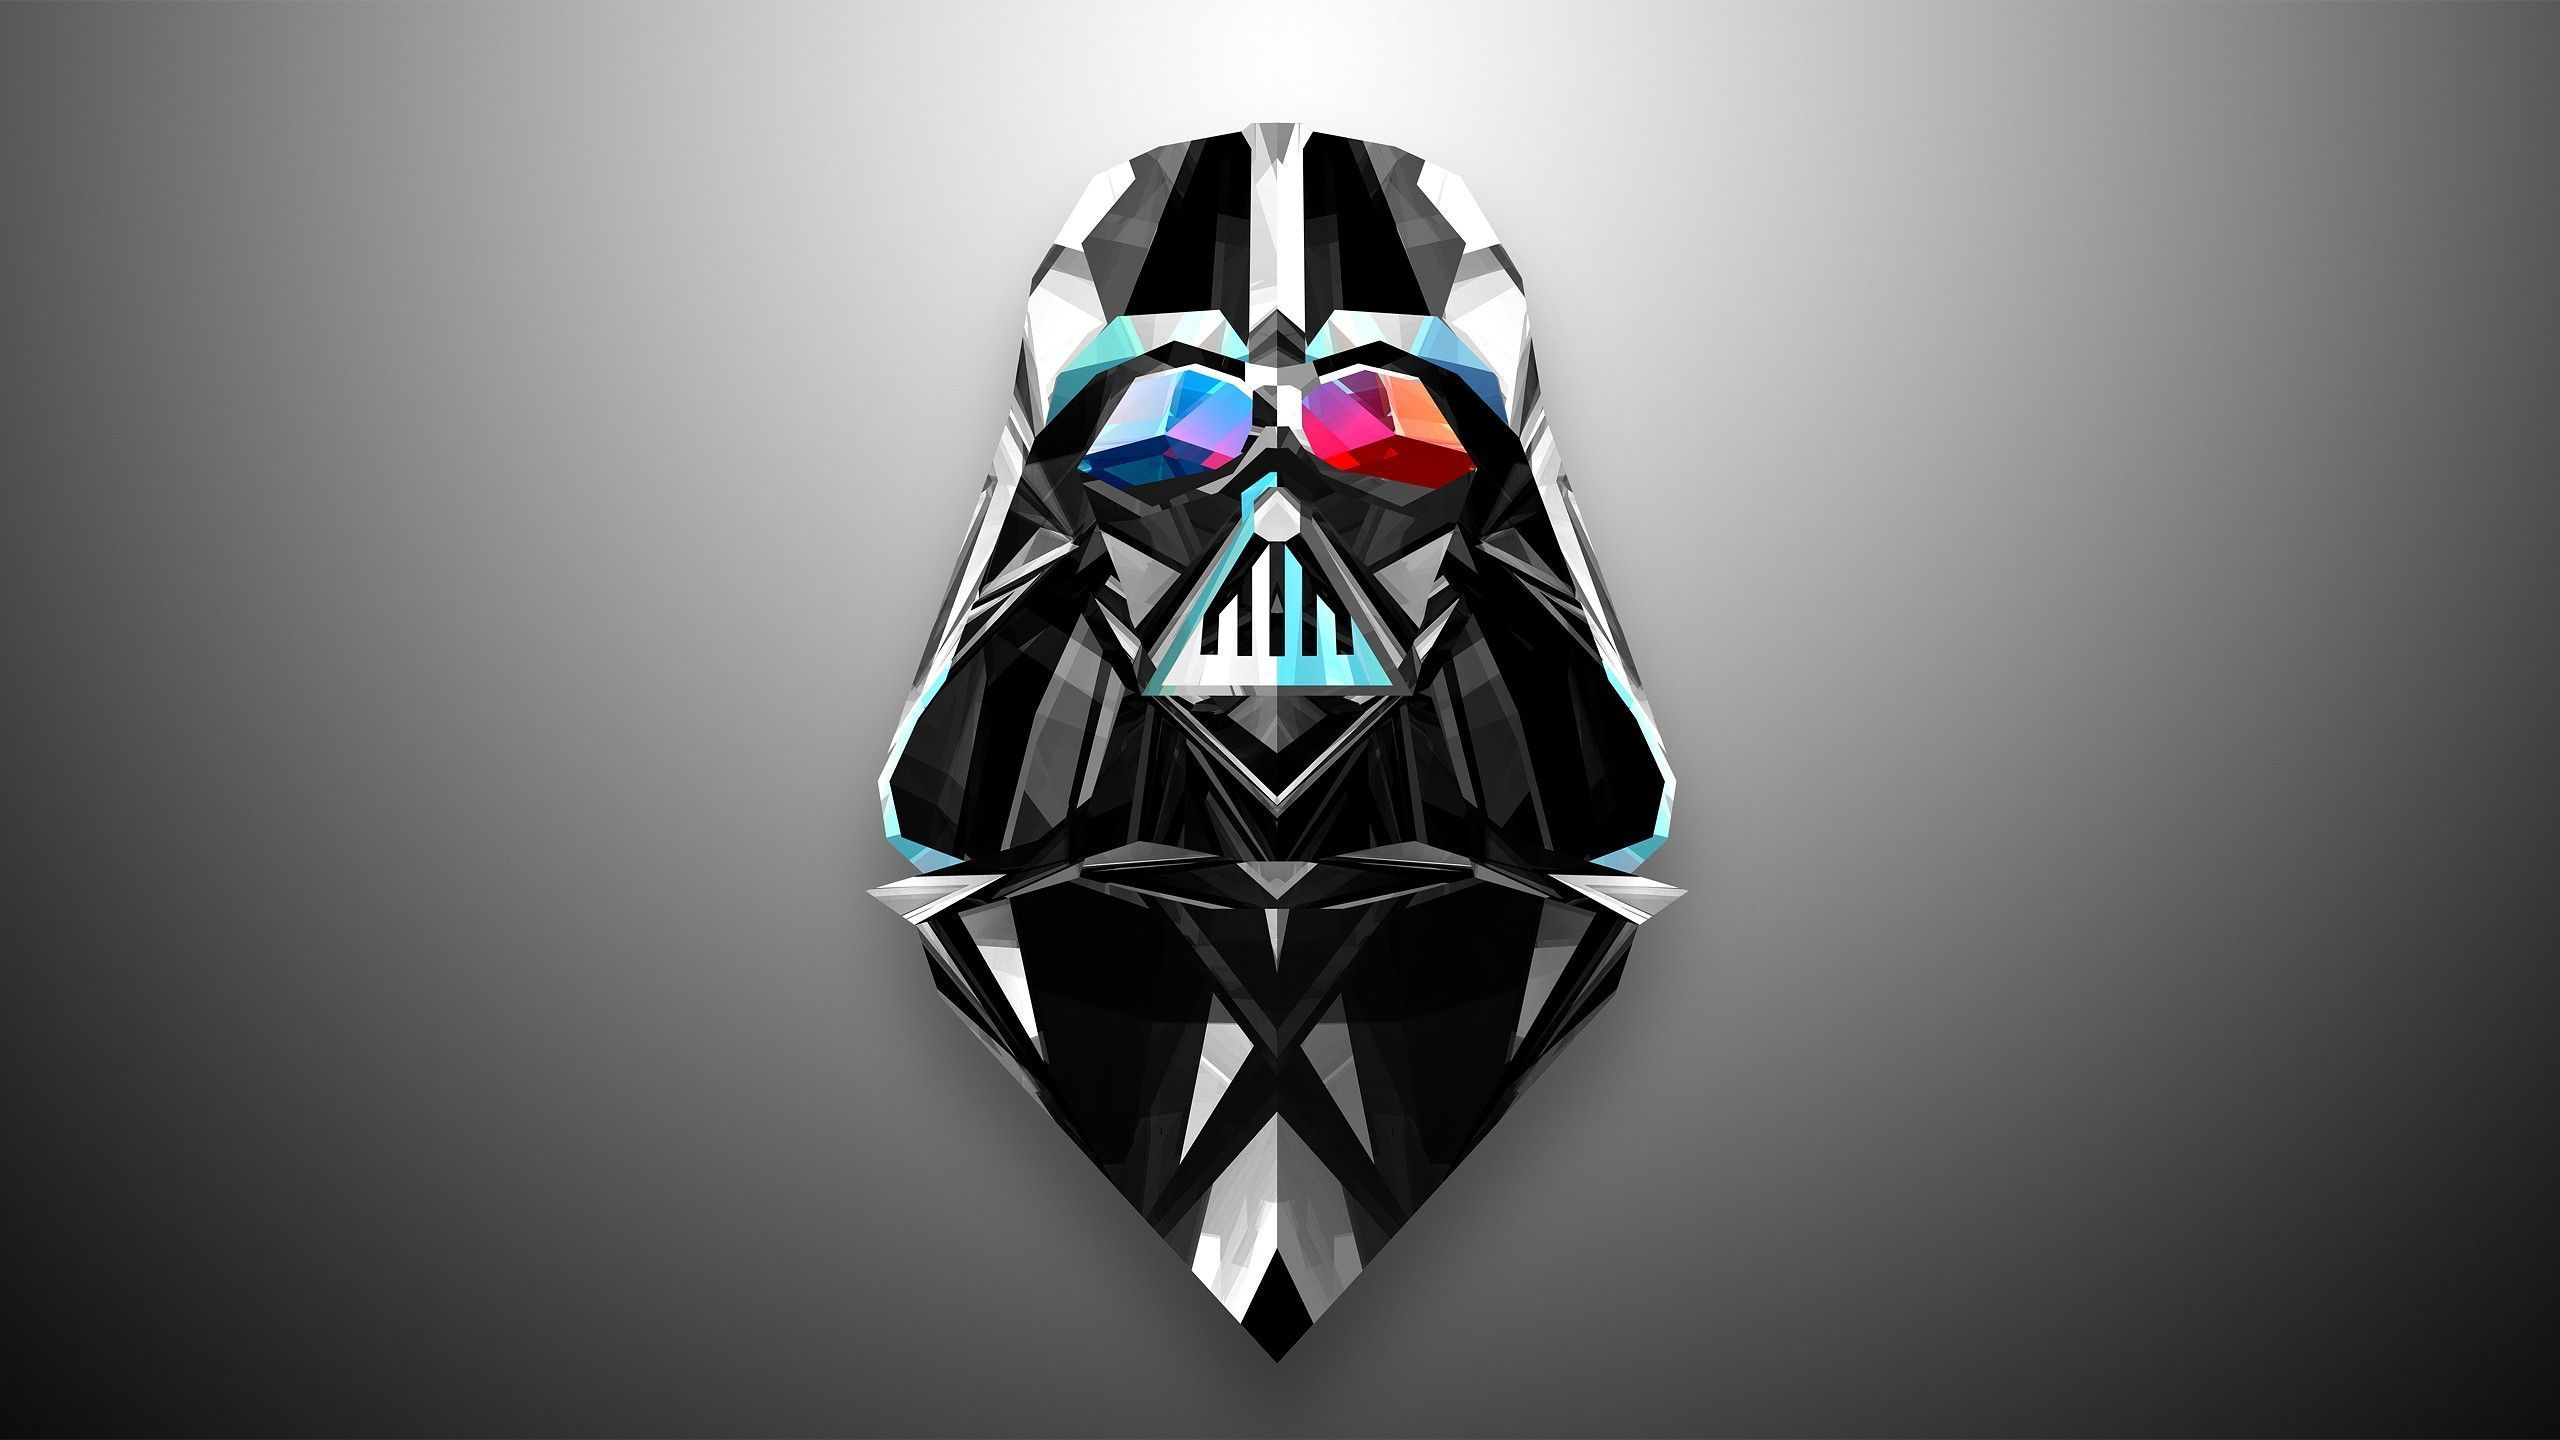 174 Darth Vader HD Wallpapers | Backgrounds - Wallpaper Abyss